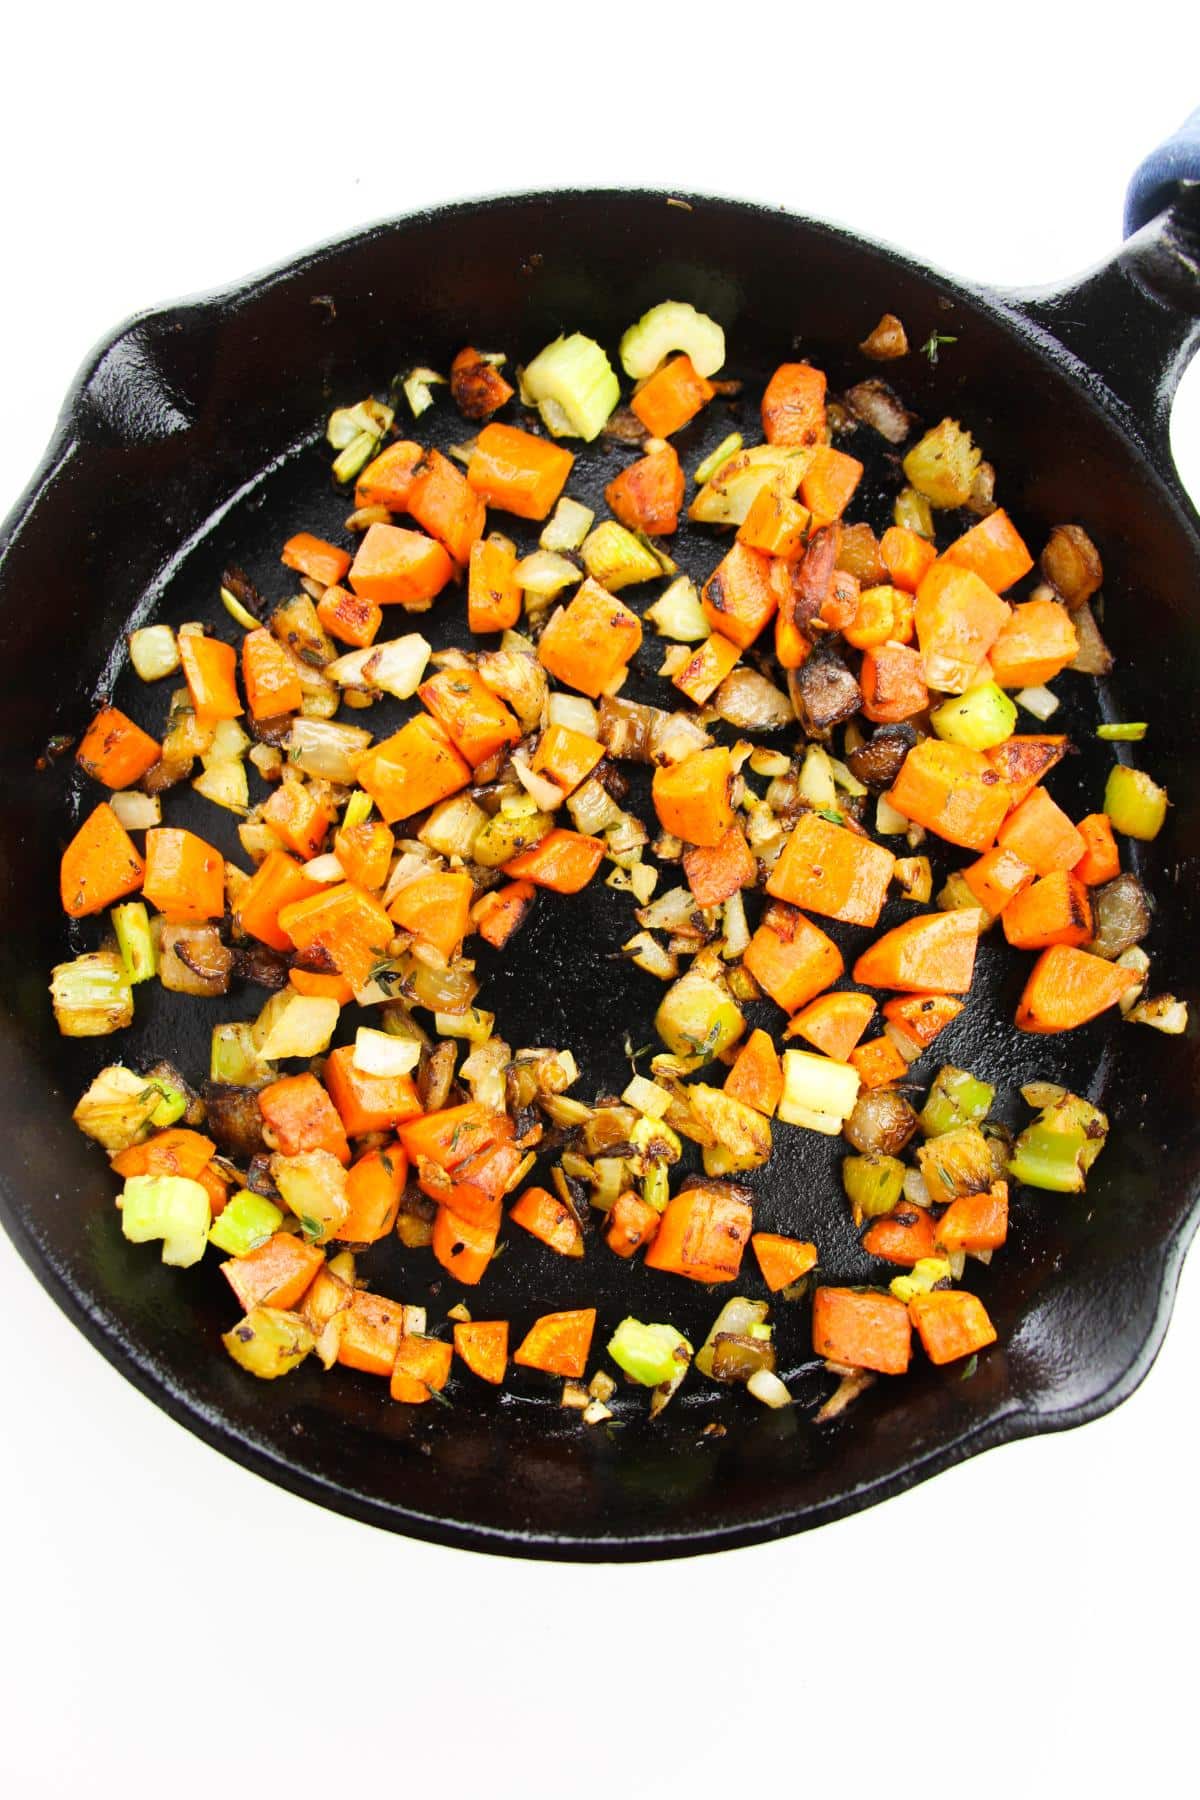 Cooked diced carrots, celery stalks, and onions in cast iron skillet.